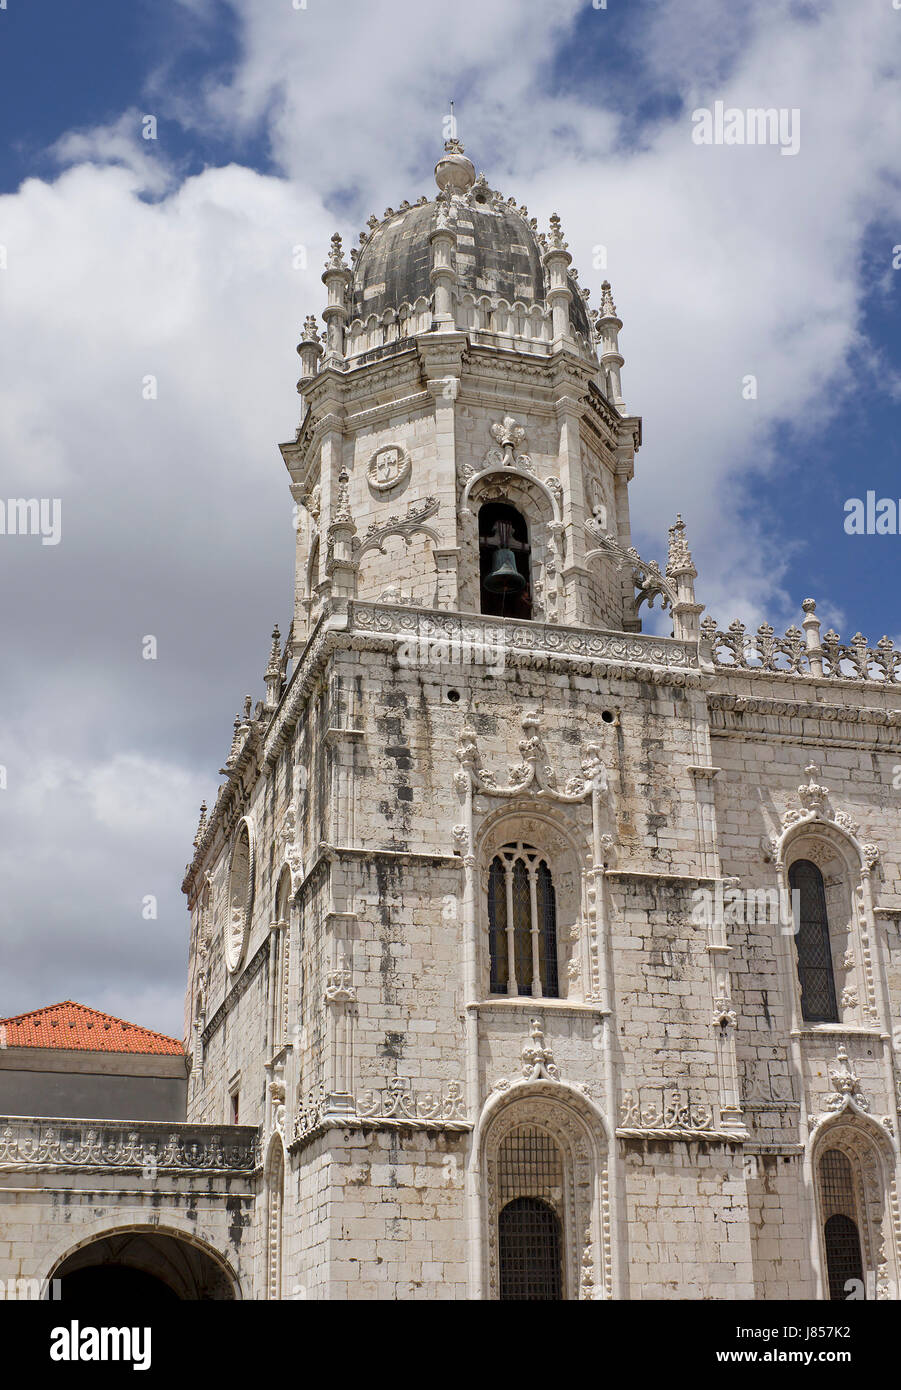 sightseeing portugal monastery lisbon emblem convent artful building buildings Stock Photo